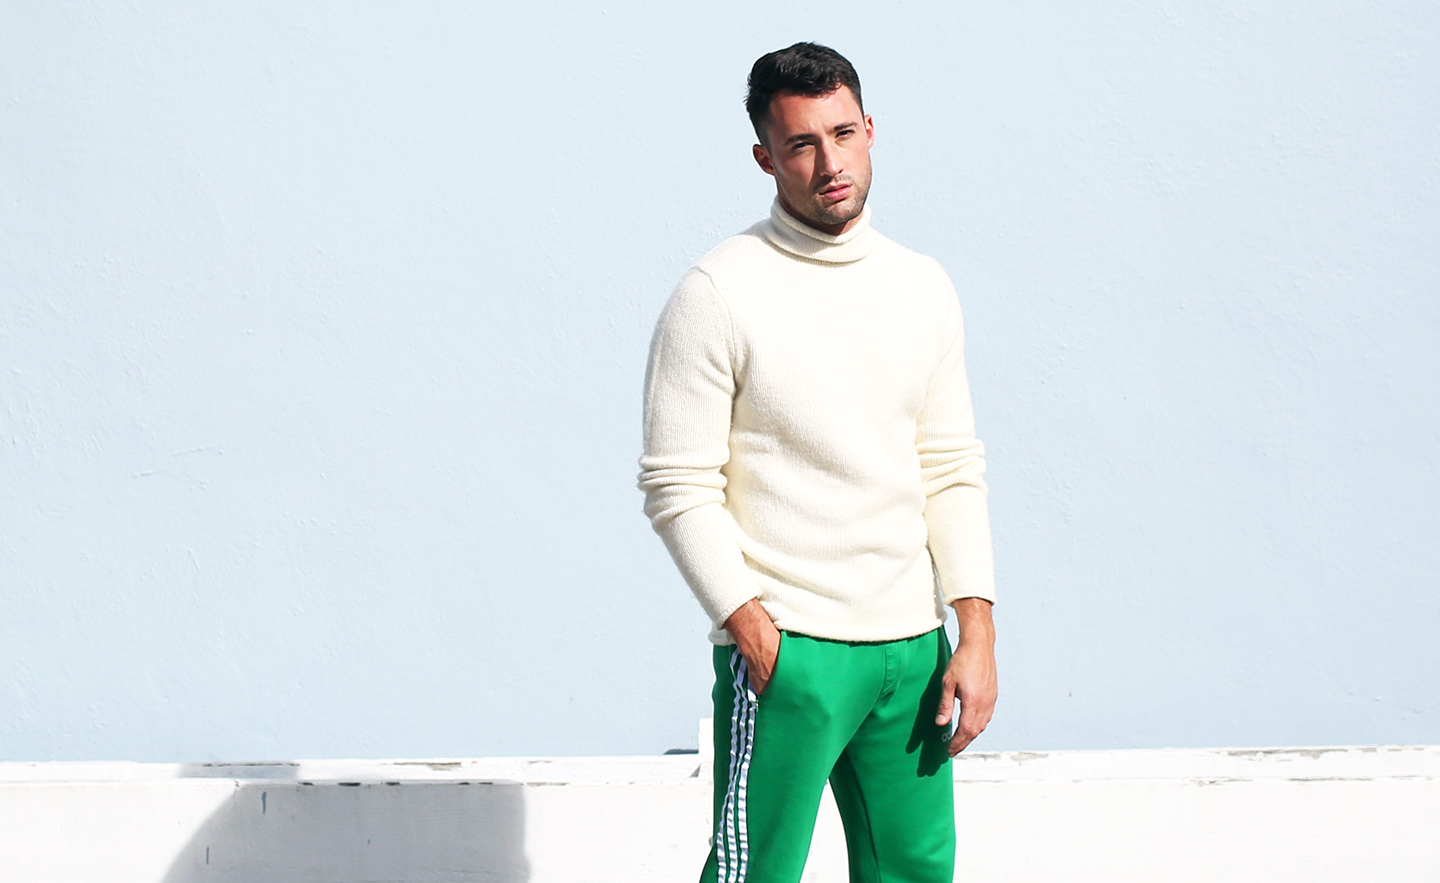 THE POSITIVE HEALTH BENEFITS OF WEARING TRACK PANTS